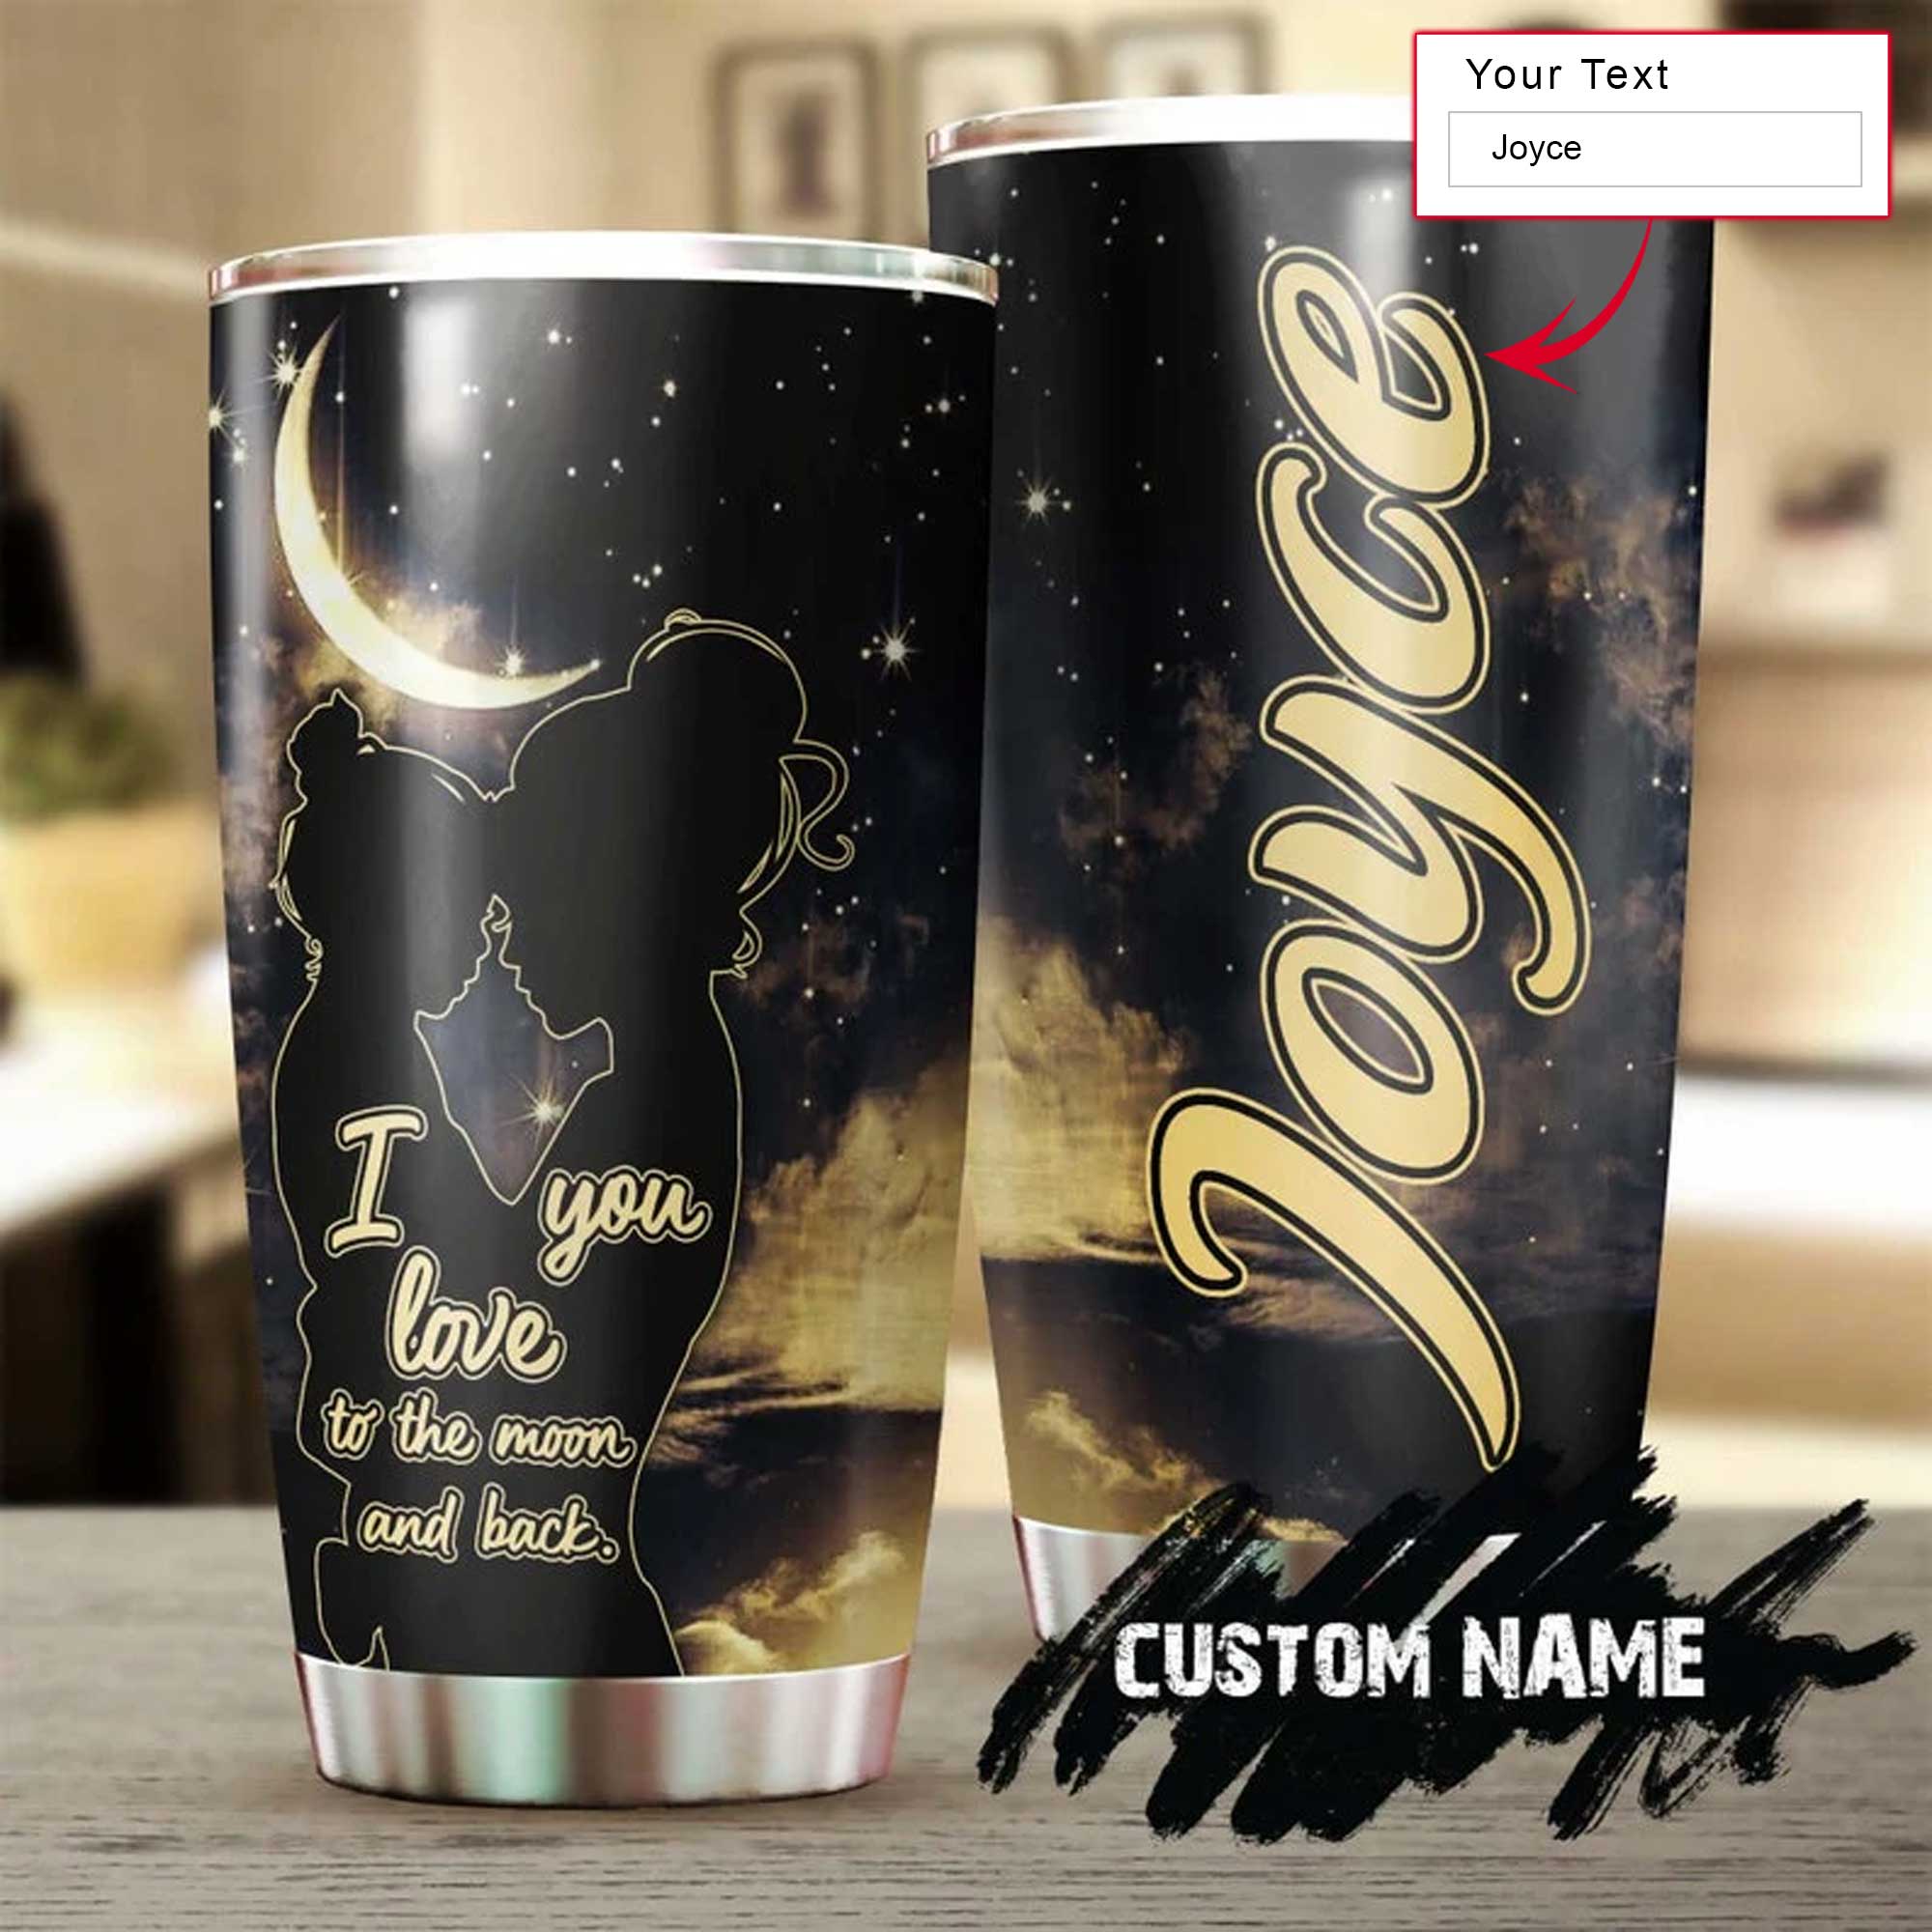 Personalized Mother's Day Gift Tumbler - Custom Gift For Mother's Day, Presents For Mom - Mom Daughter, I Love You To The Moon And Back Tumbler